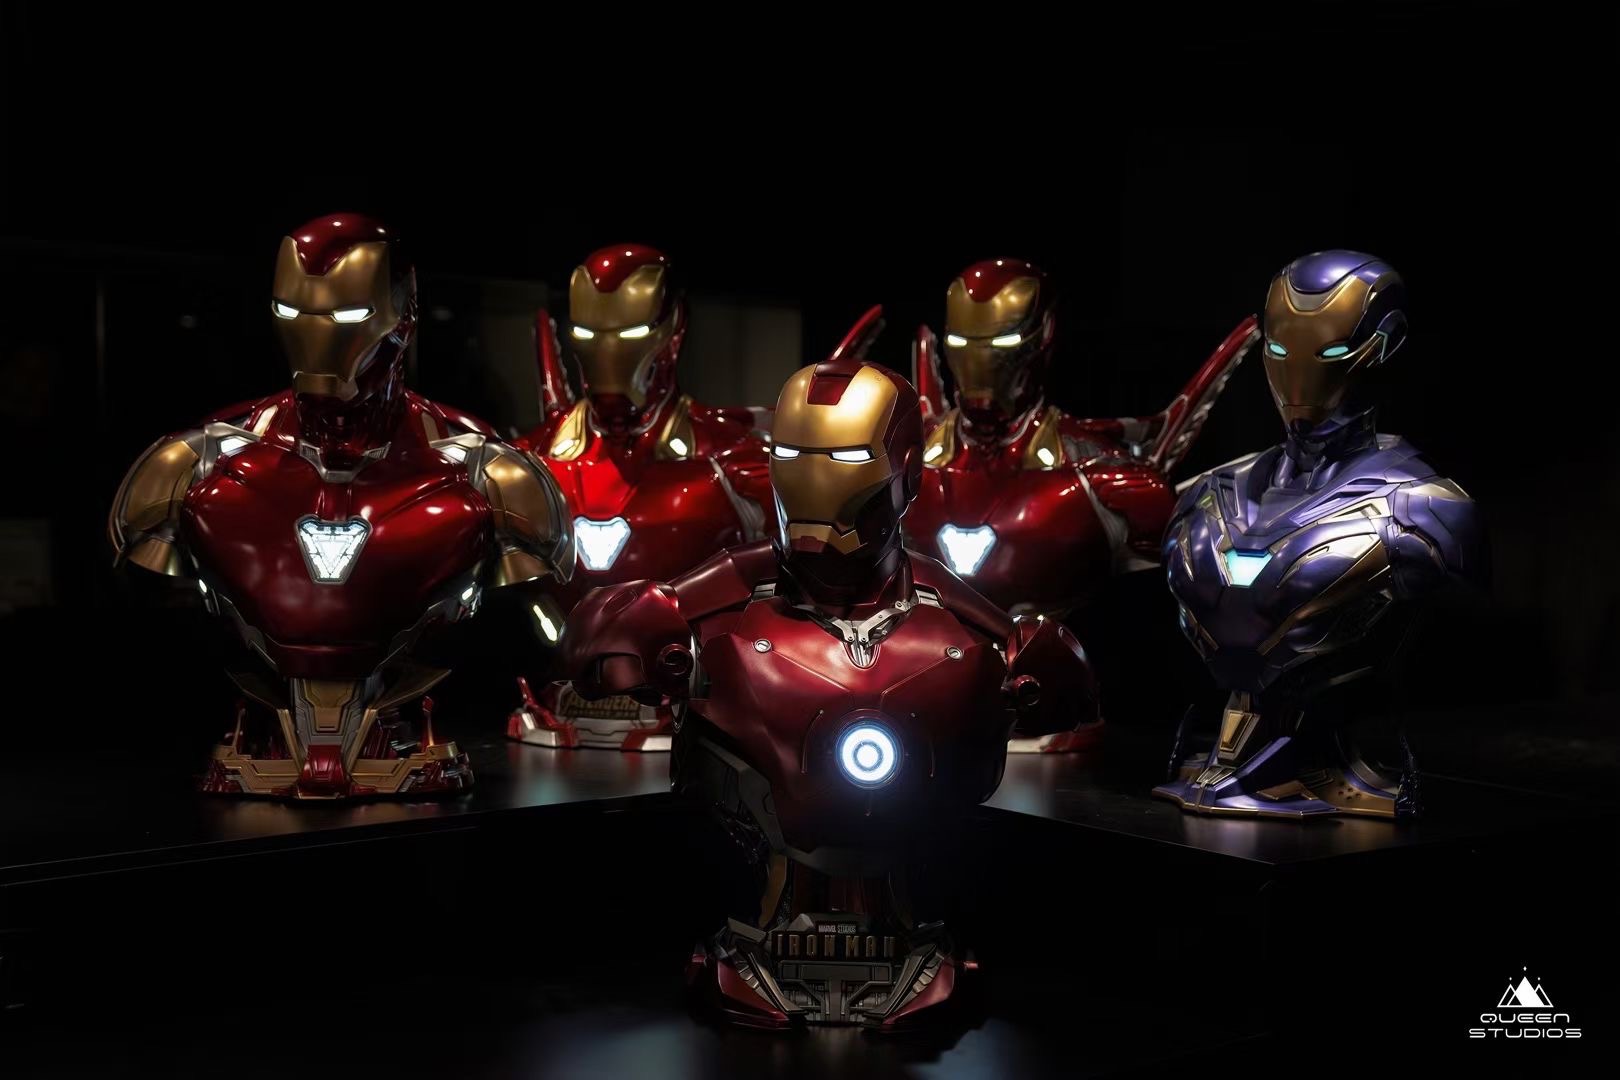 1/1 Iron Man Bust MK3 by Queen Studios (มัดจำ) [[SOLD OUT]]